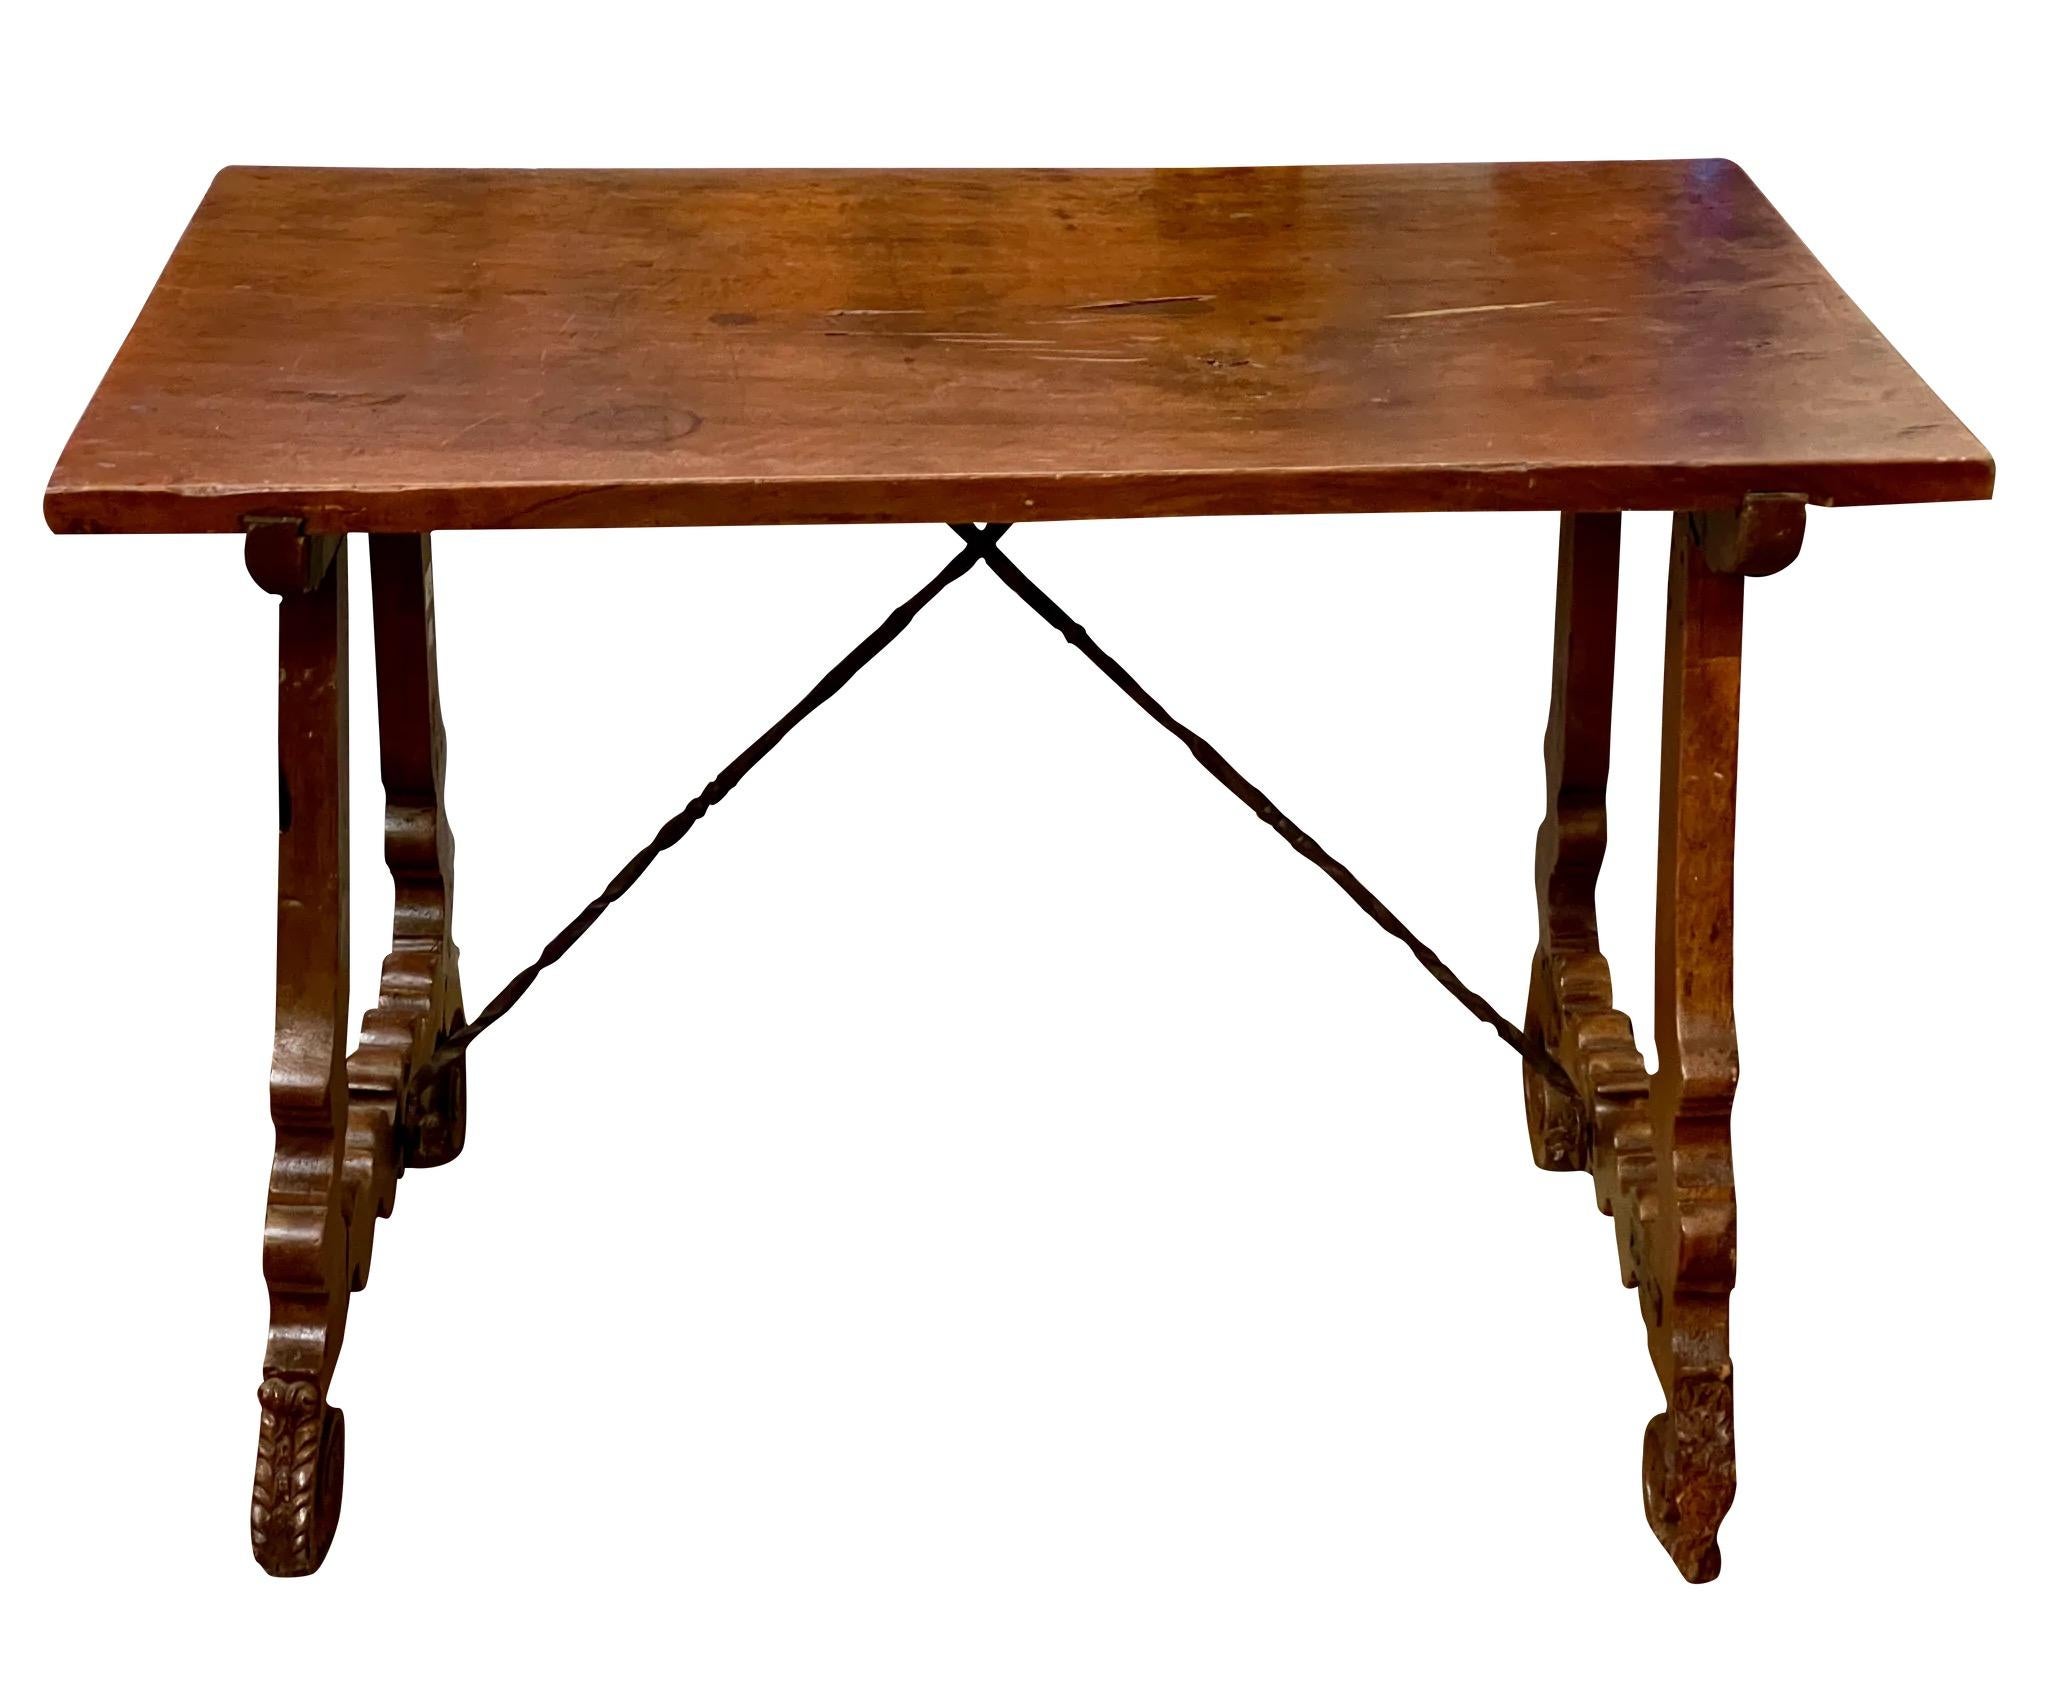 Spanish walnut tavern table, 18th c., with wrought iron cross stretchers
